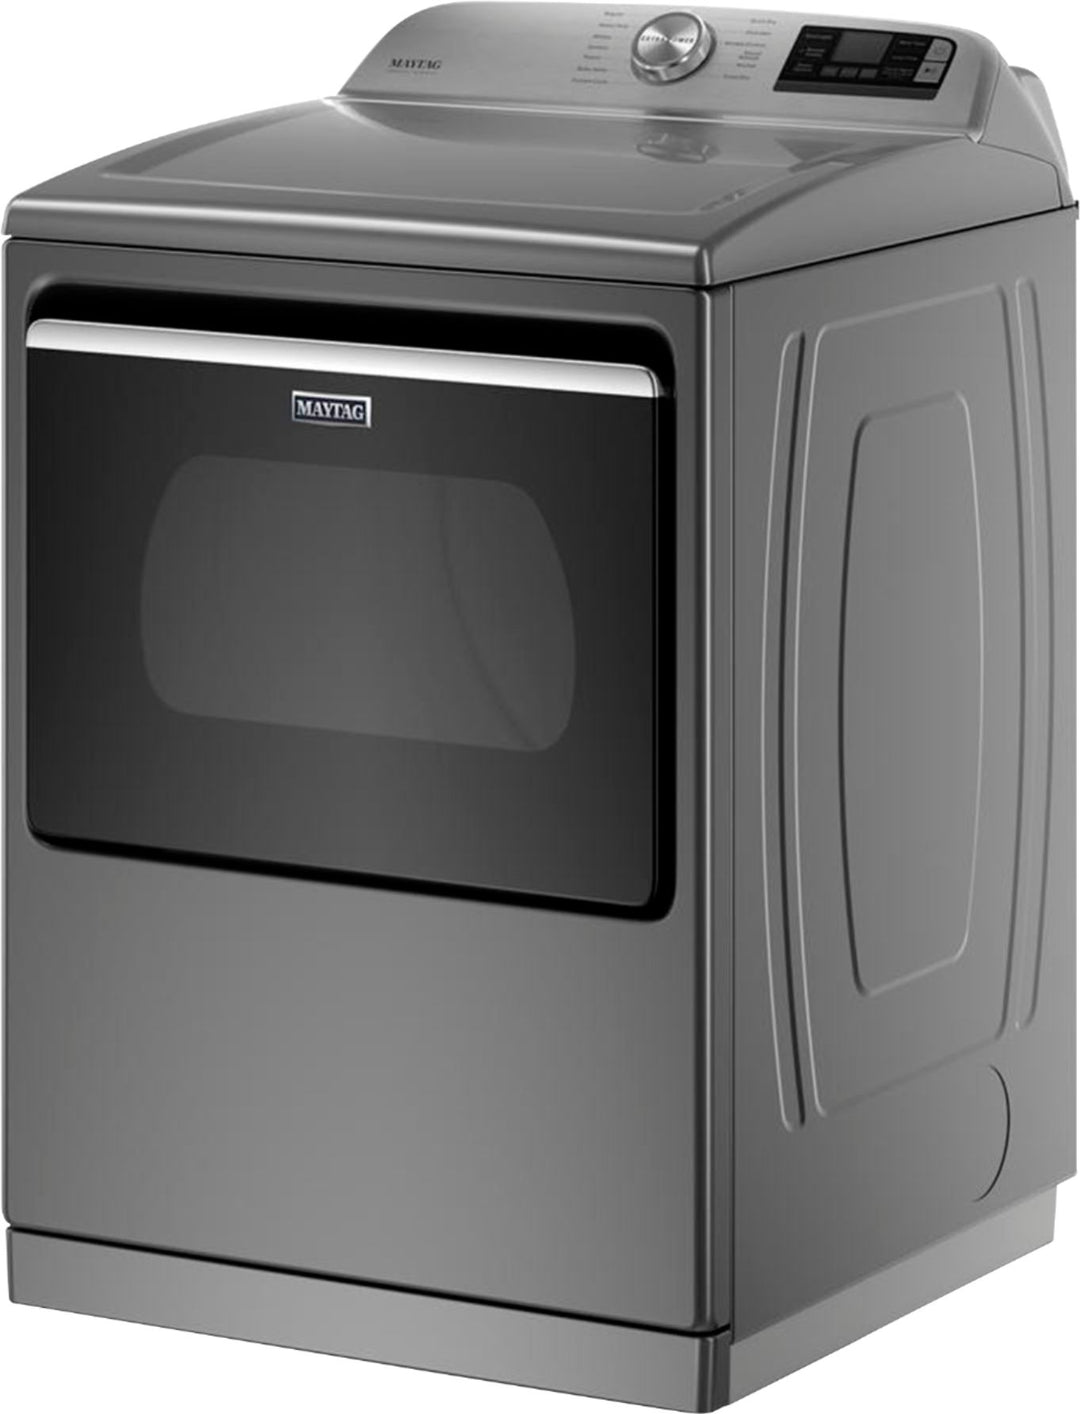 Maytag - 7.4 Cu. Ft. Smart Electric Dryer with Steam and Extra Power Button - Metallic slate_6